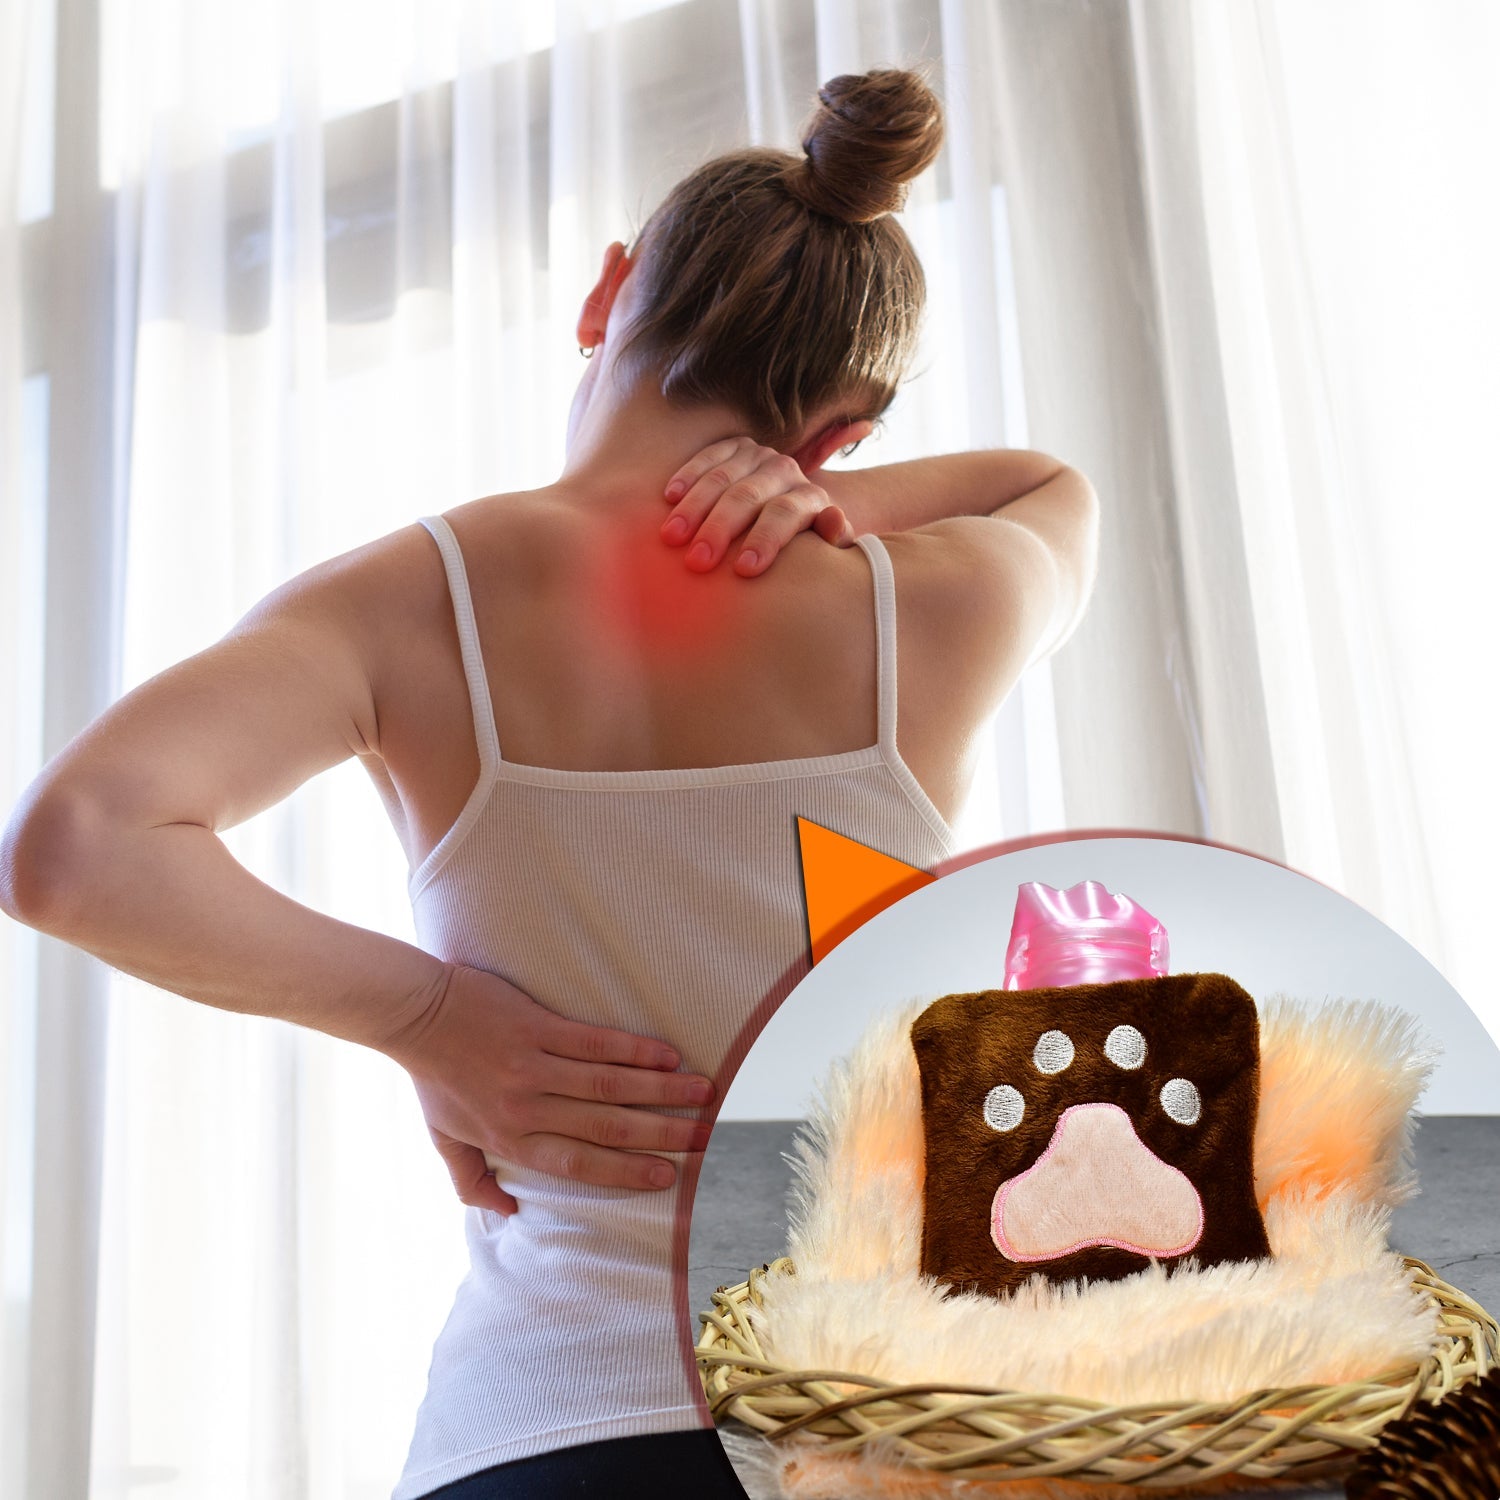 6518 Paw Print small Hot Water Bag with Cover for Pain Relief, Neck, Shoulder Pain and Hand, Feet Warmer, Menstrual Cramps. 